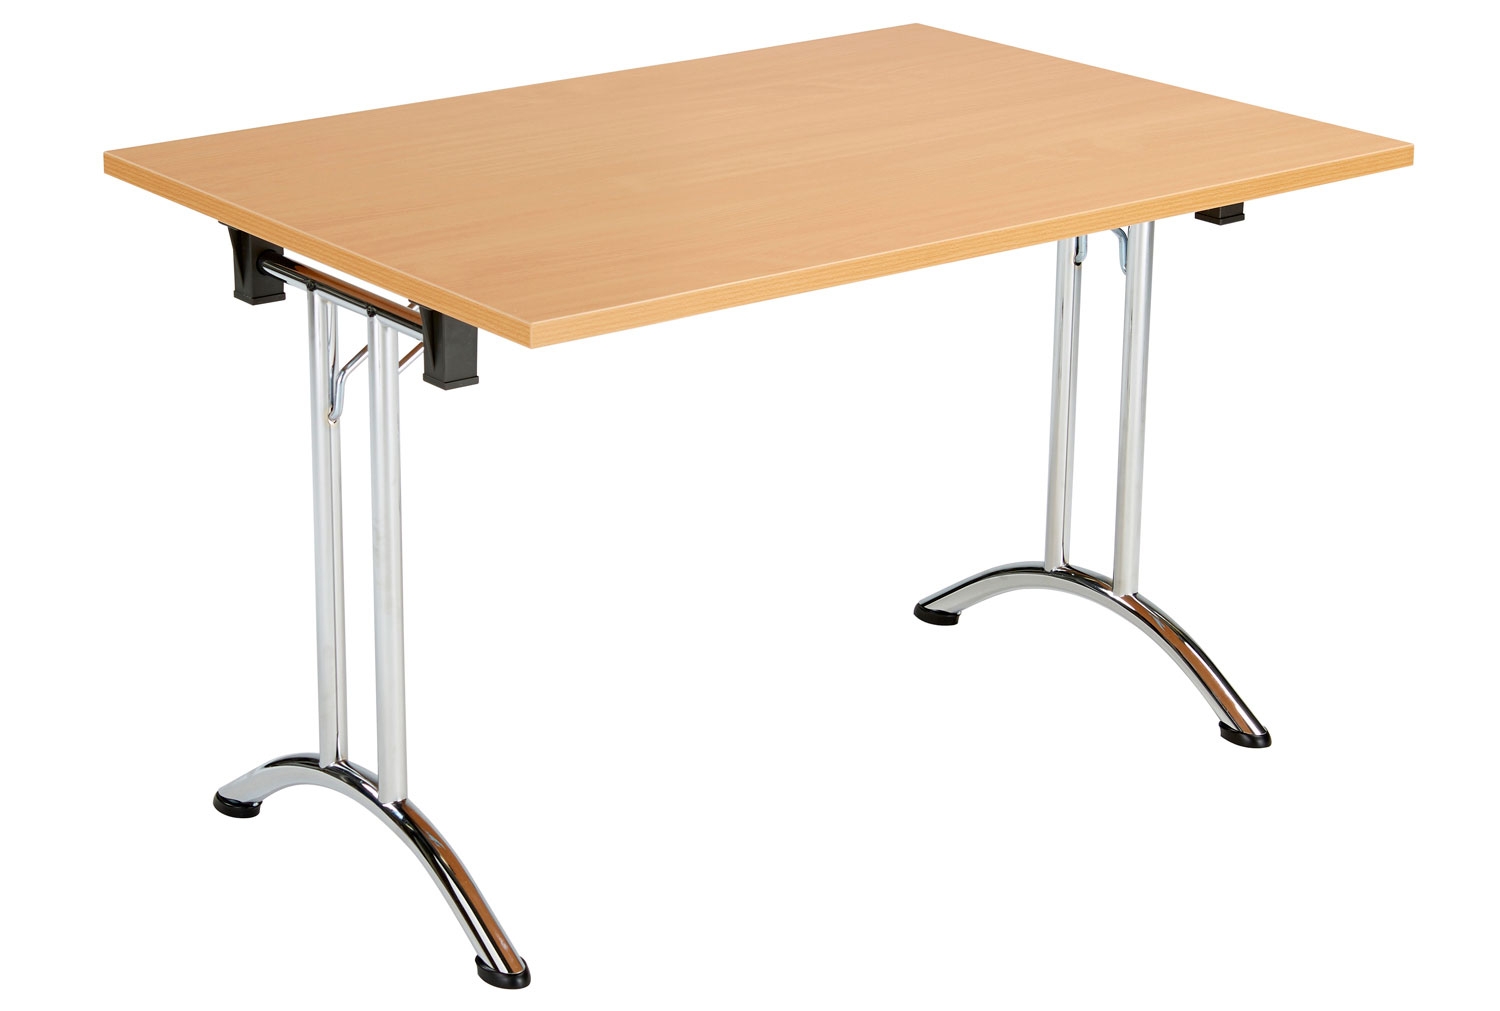 Alliance Rectangular Folding Table, 120wx70dx73h (cm), Beech, Express Delivery